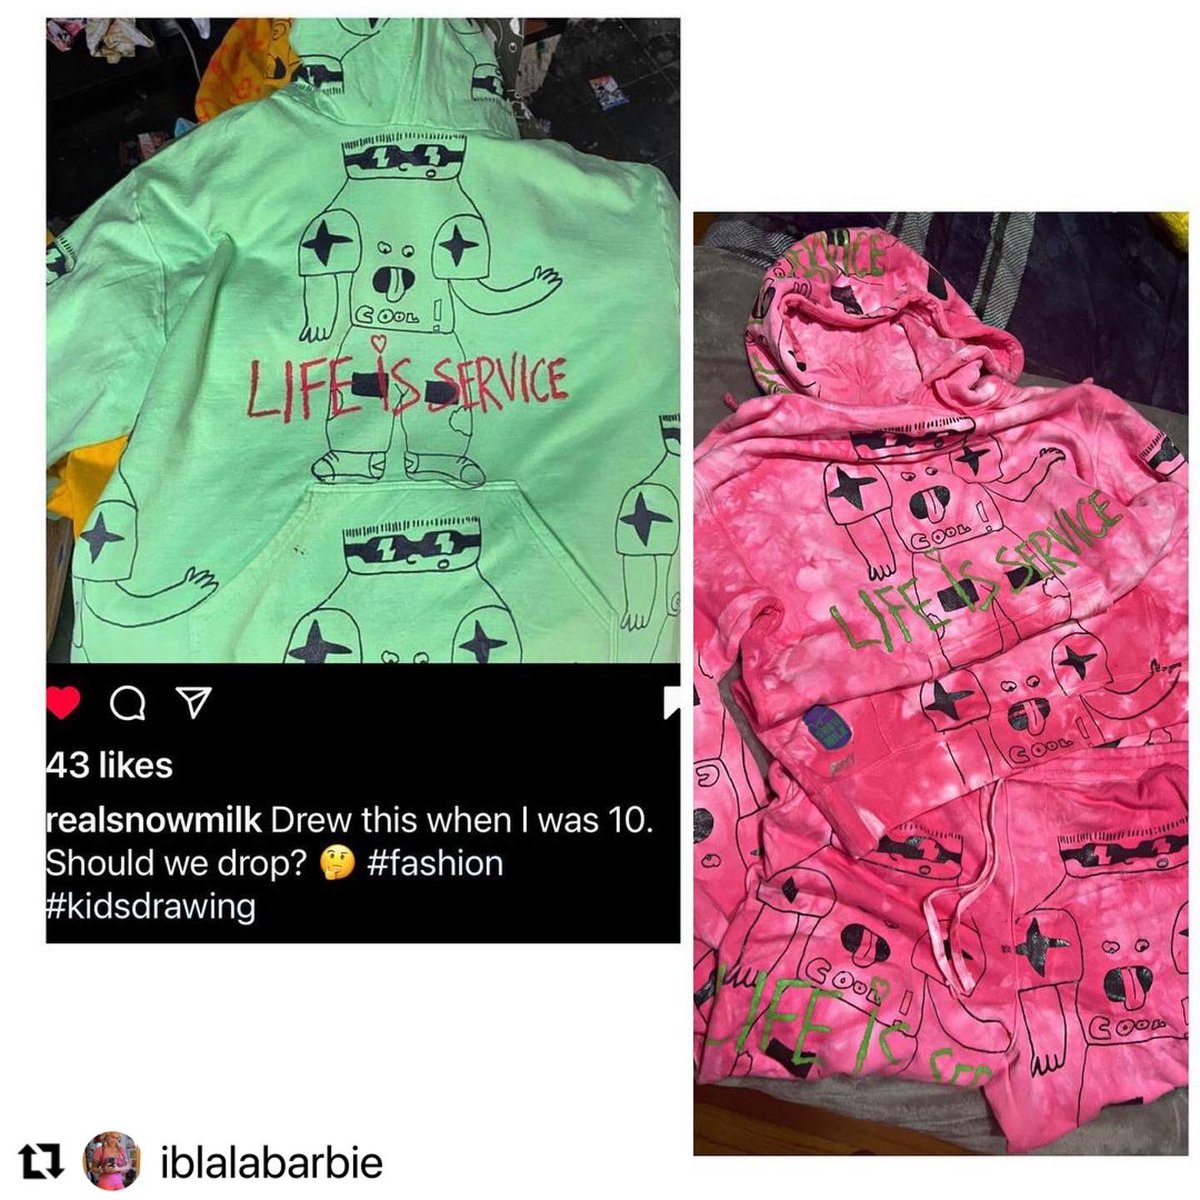 #Repost @iblalabarbie 
・・・
So excited to have this 1st edition NYC wearable artwork by @doobiedukesims ….thank you @realsnowmilk for this AWESOME purchase!! Super comfy and crazy compliments!!🥰🎊👏🙌 Happy New Year’s you guys!! #realsnowmilk #doobiedukesims #nyc  #nycstyle m